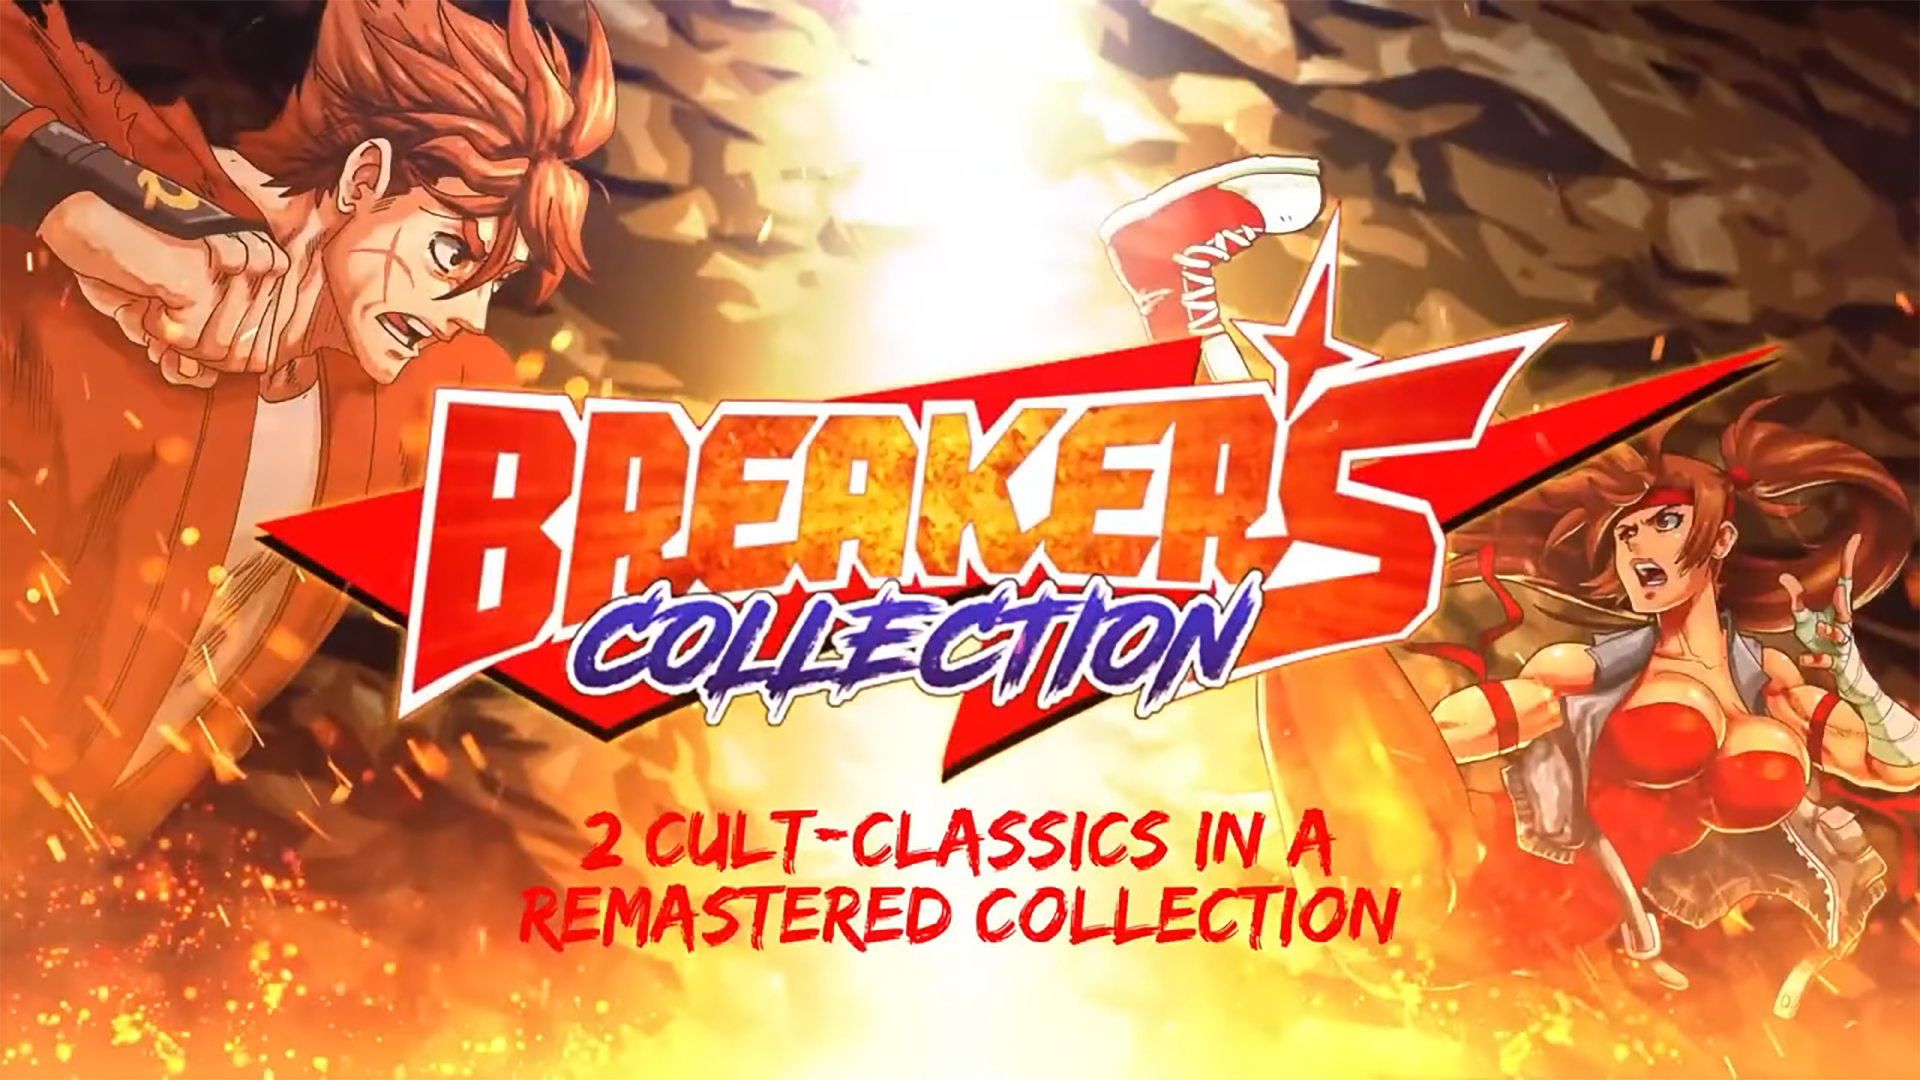 Breakers Collection จะรองรับระบบ Rollback Netcode และ Cross-Play